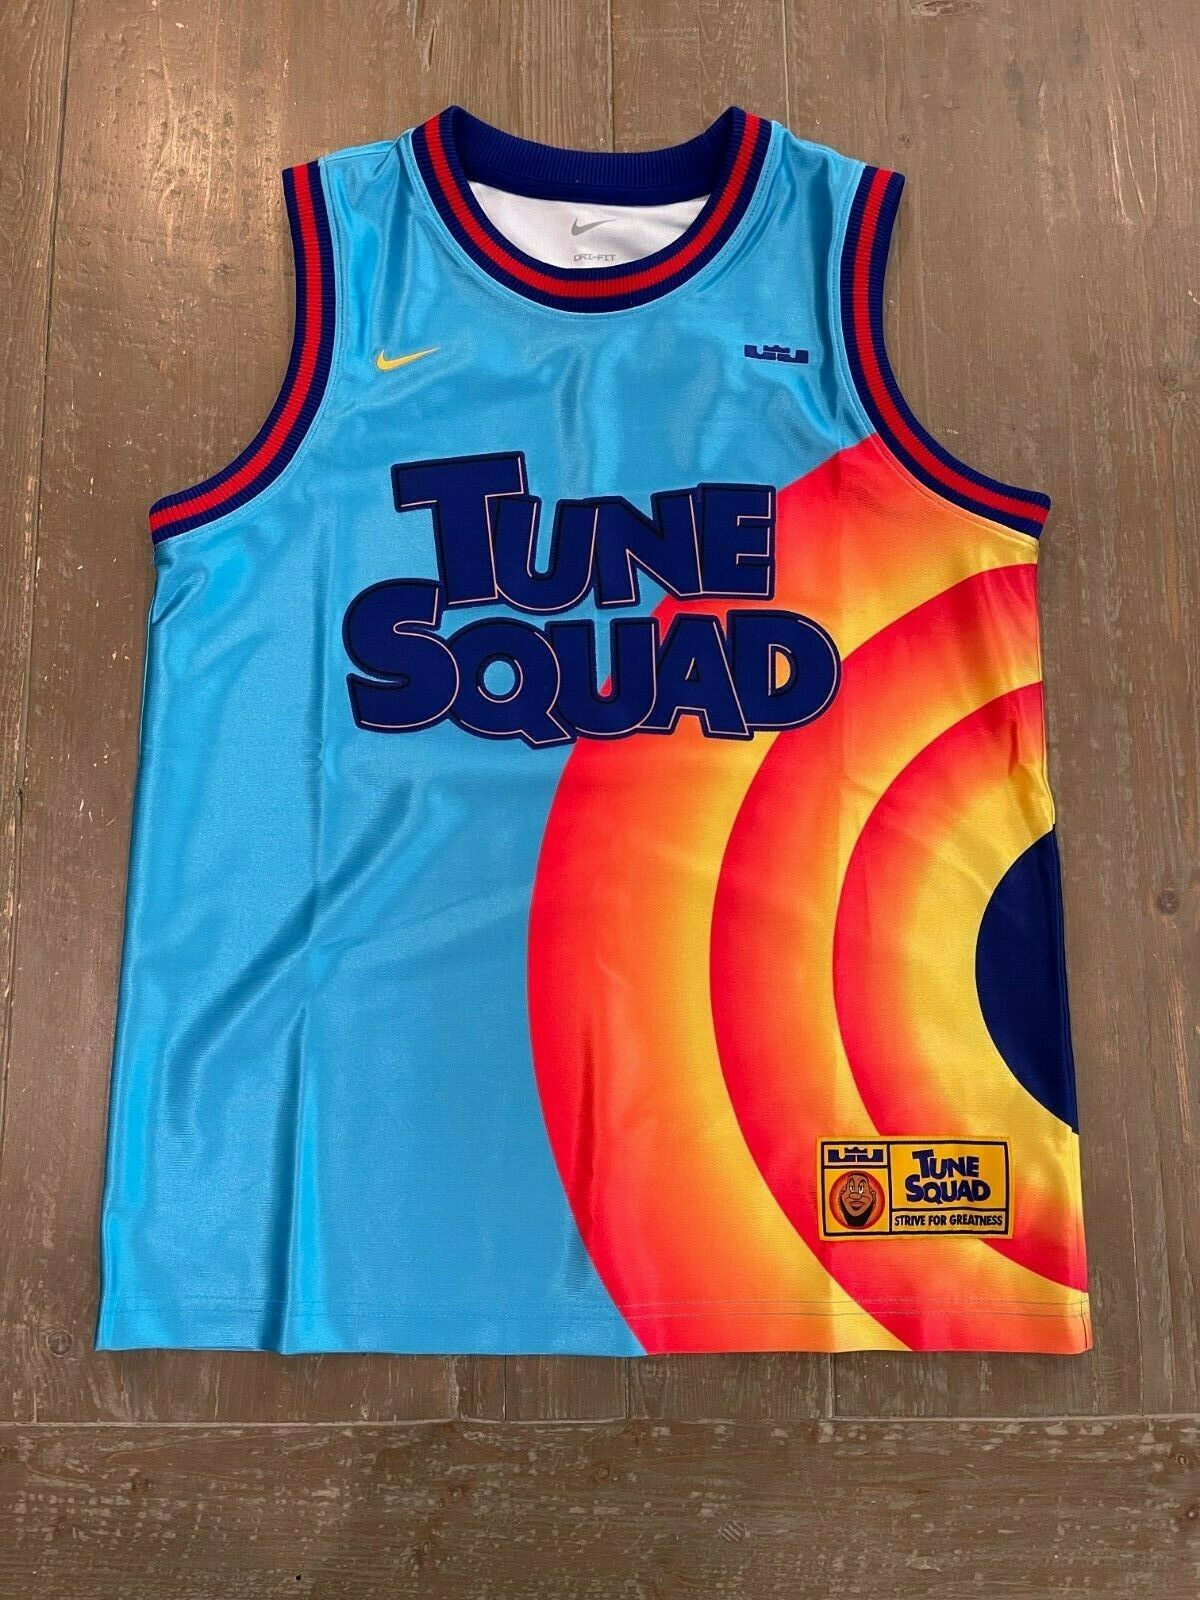 Nwt Nike Dri-fit Space Jam Tune Squad Basketball Jersey Youth Xl